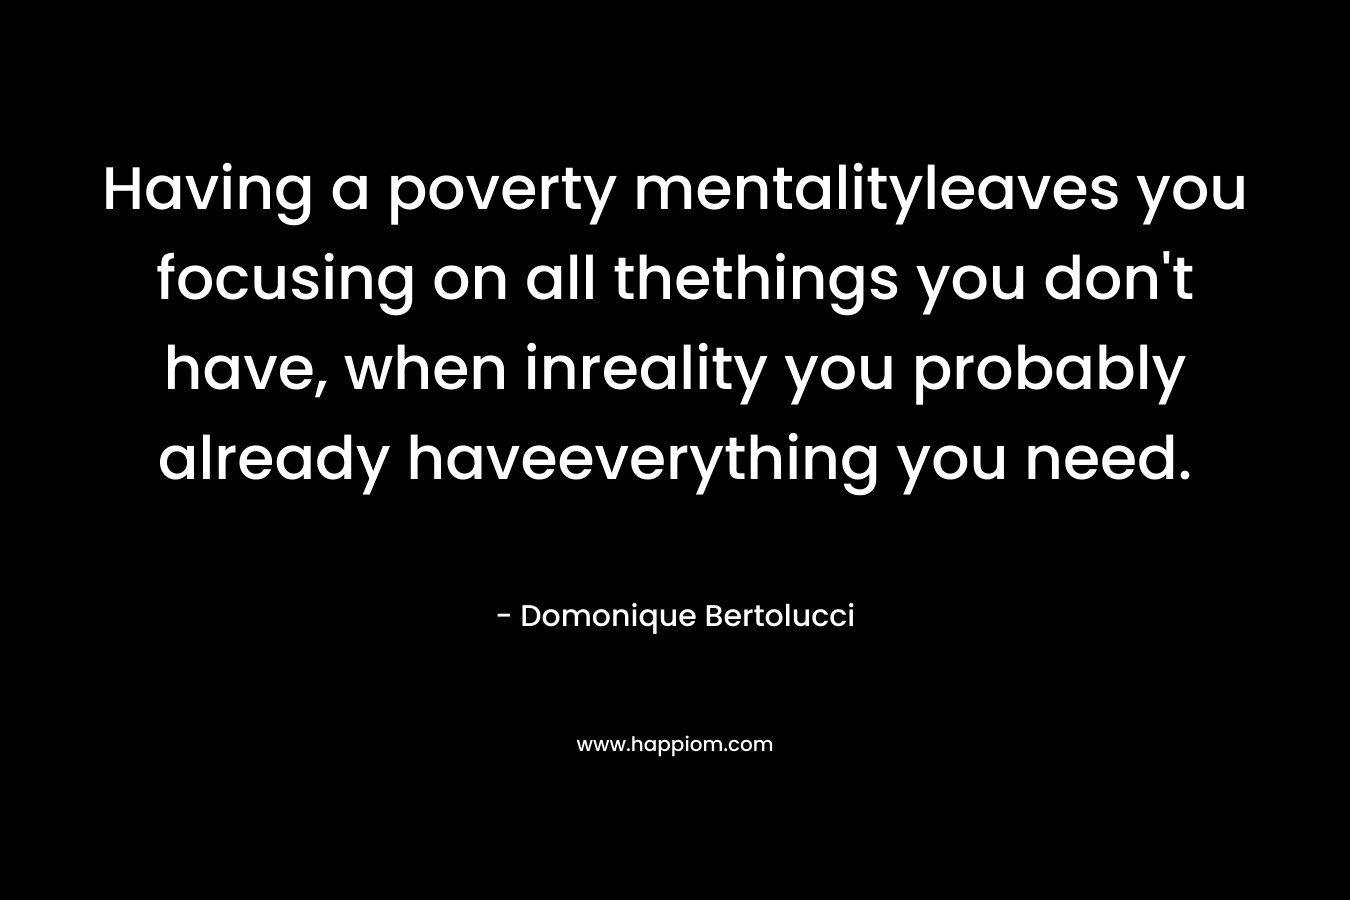 Having a poverty mentalityleaves you focusing on all thethings you don’t have, when inreality you probably already haveeverything you need. – Domonique Bertolucci